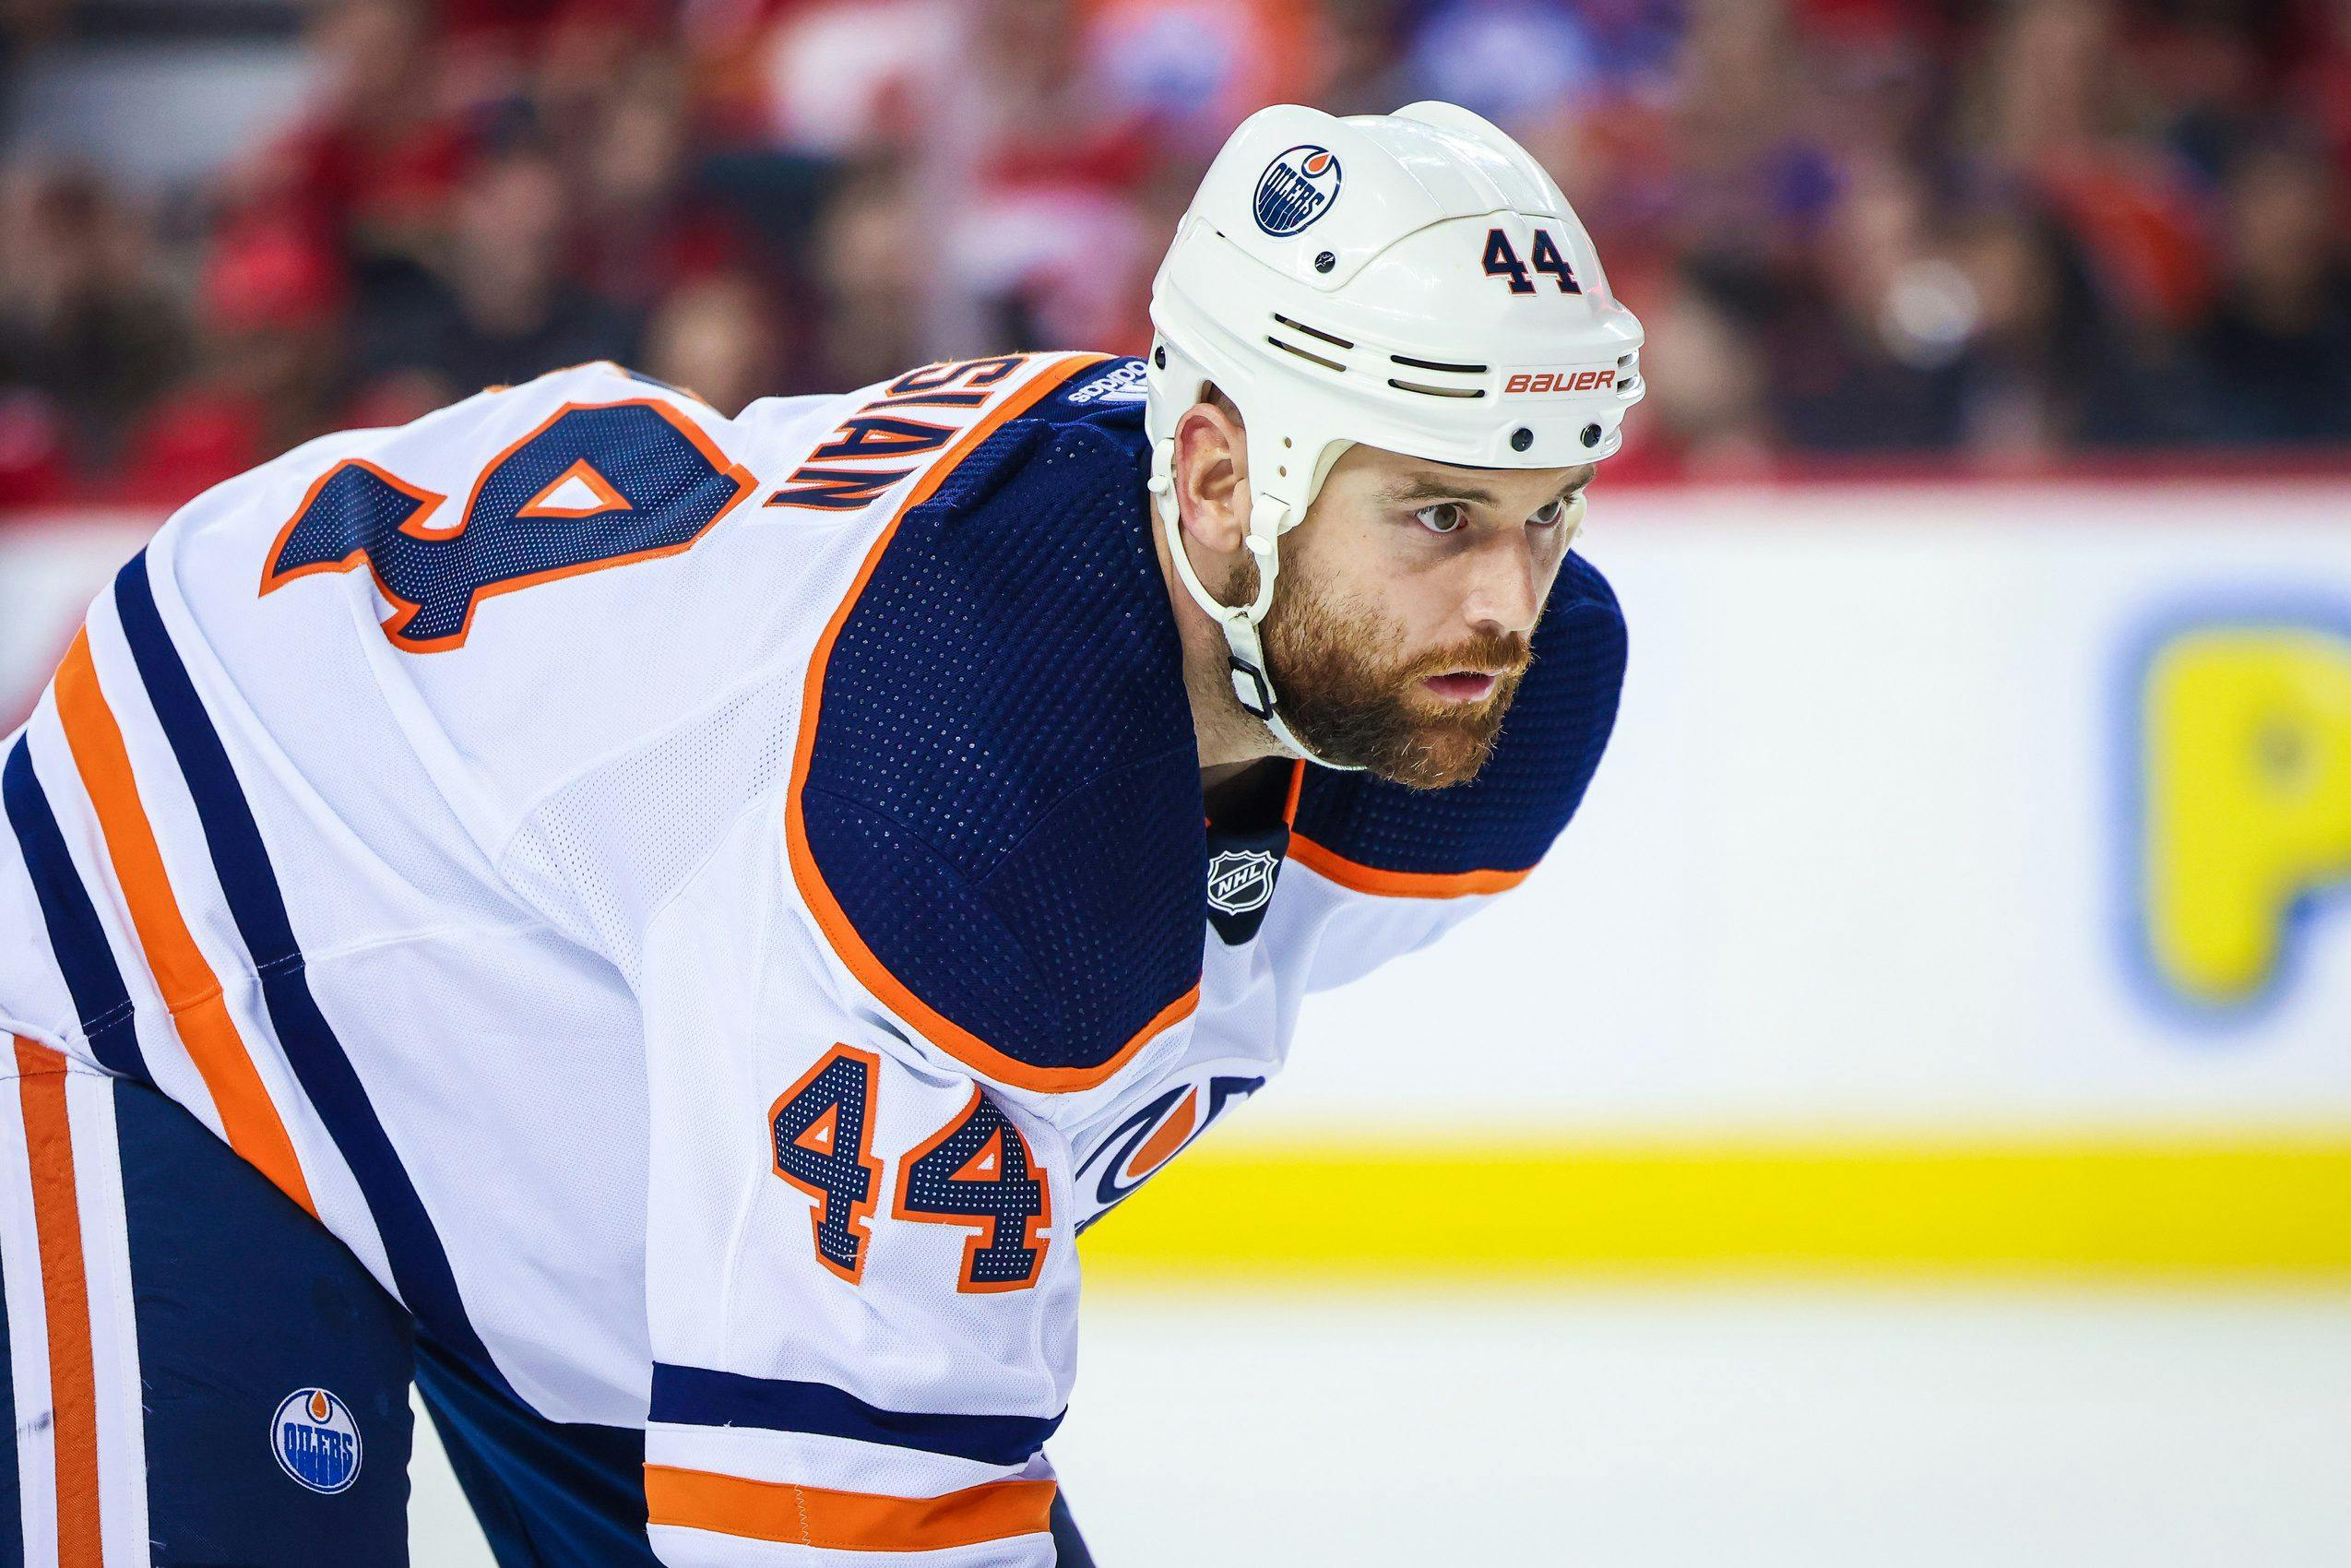 Edmonton Oilers trade Zack Kassian, 29th pick, and future picks to Arizona Coyotes for 32nd pick